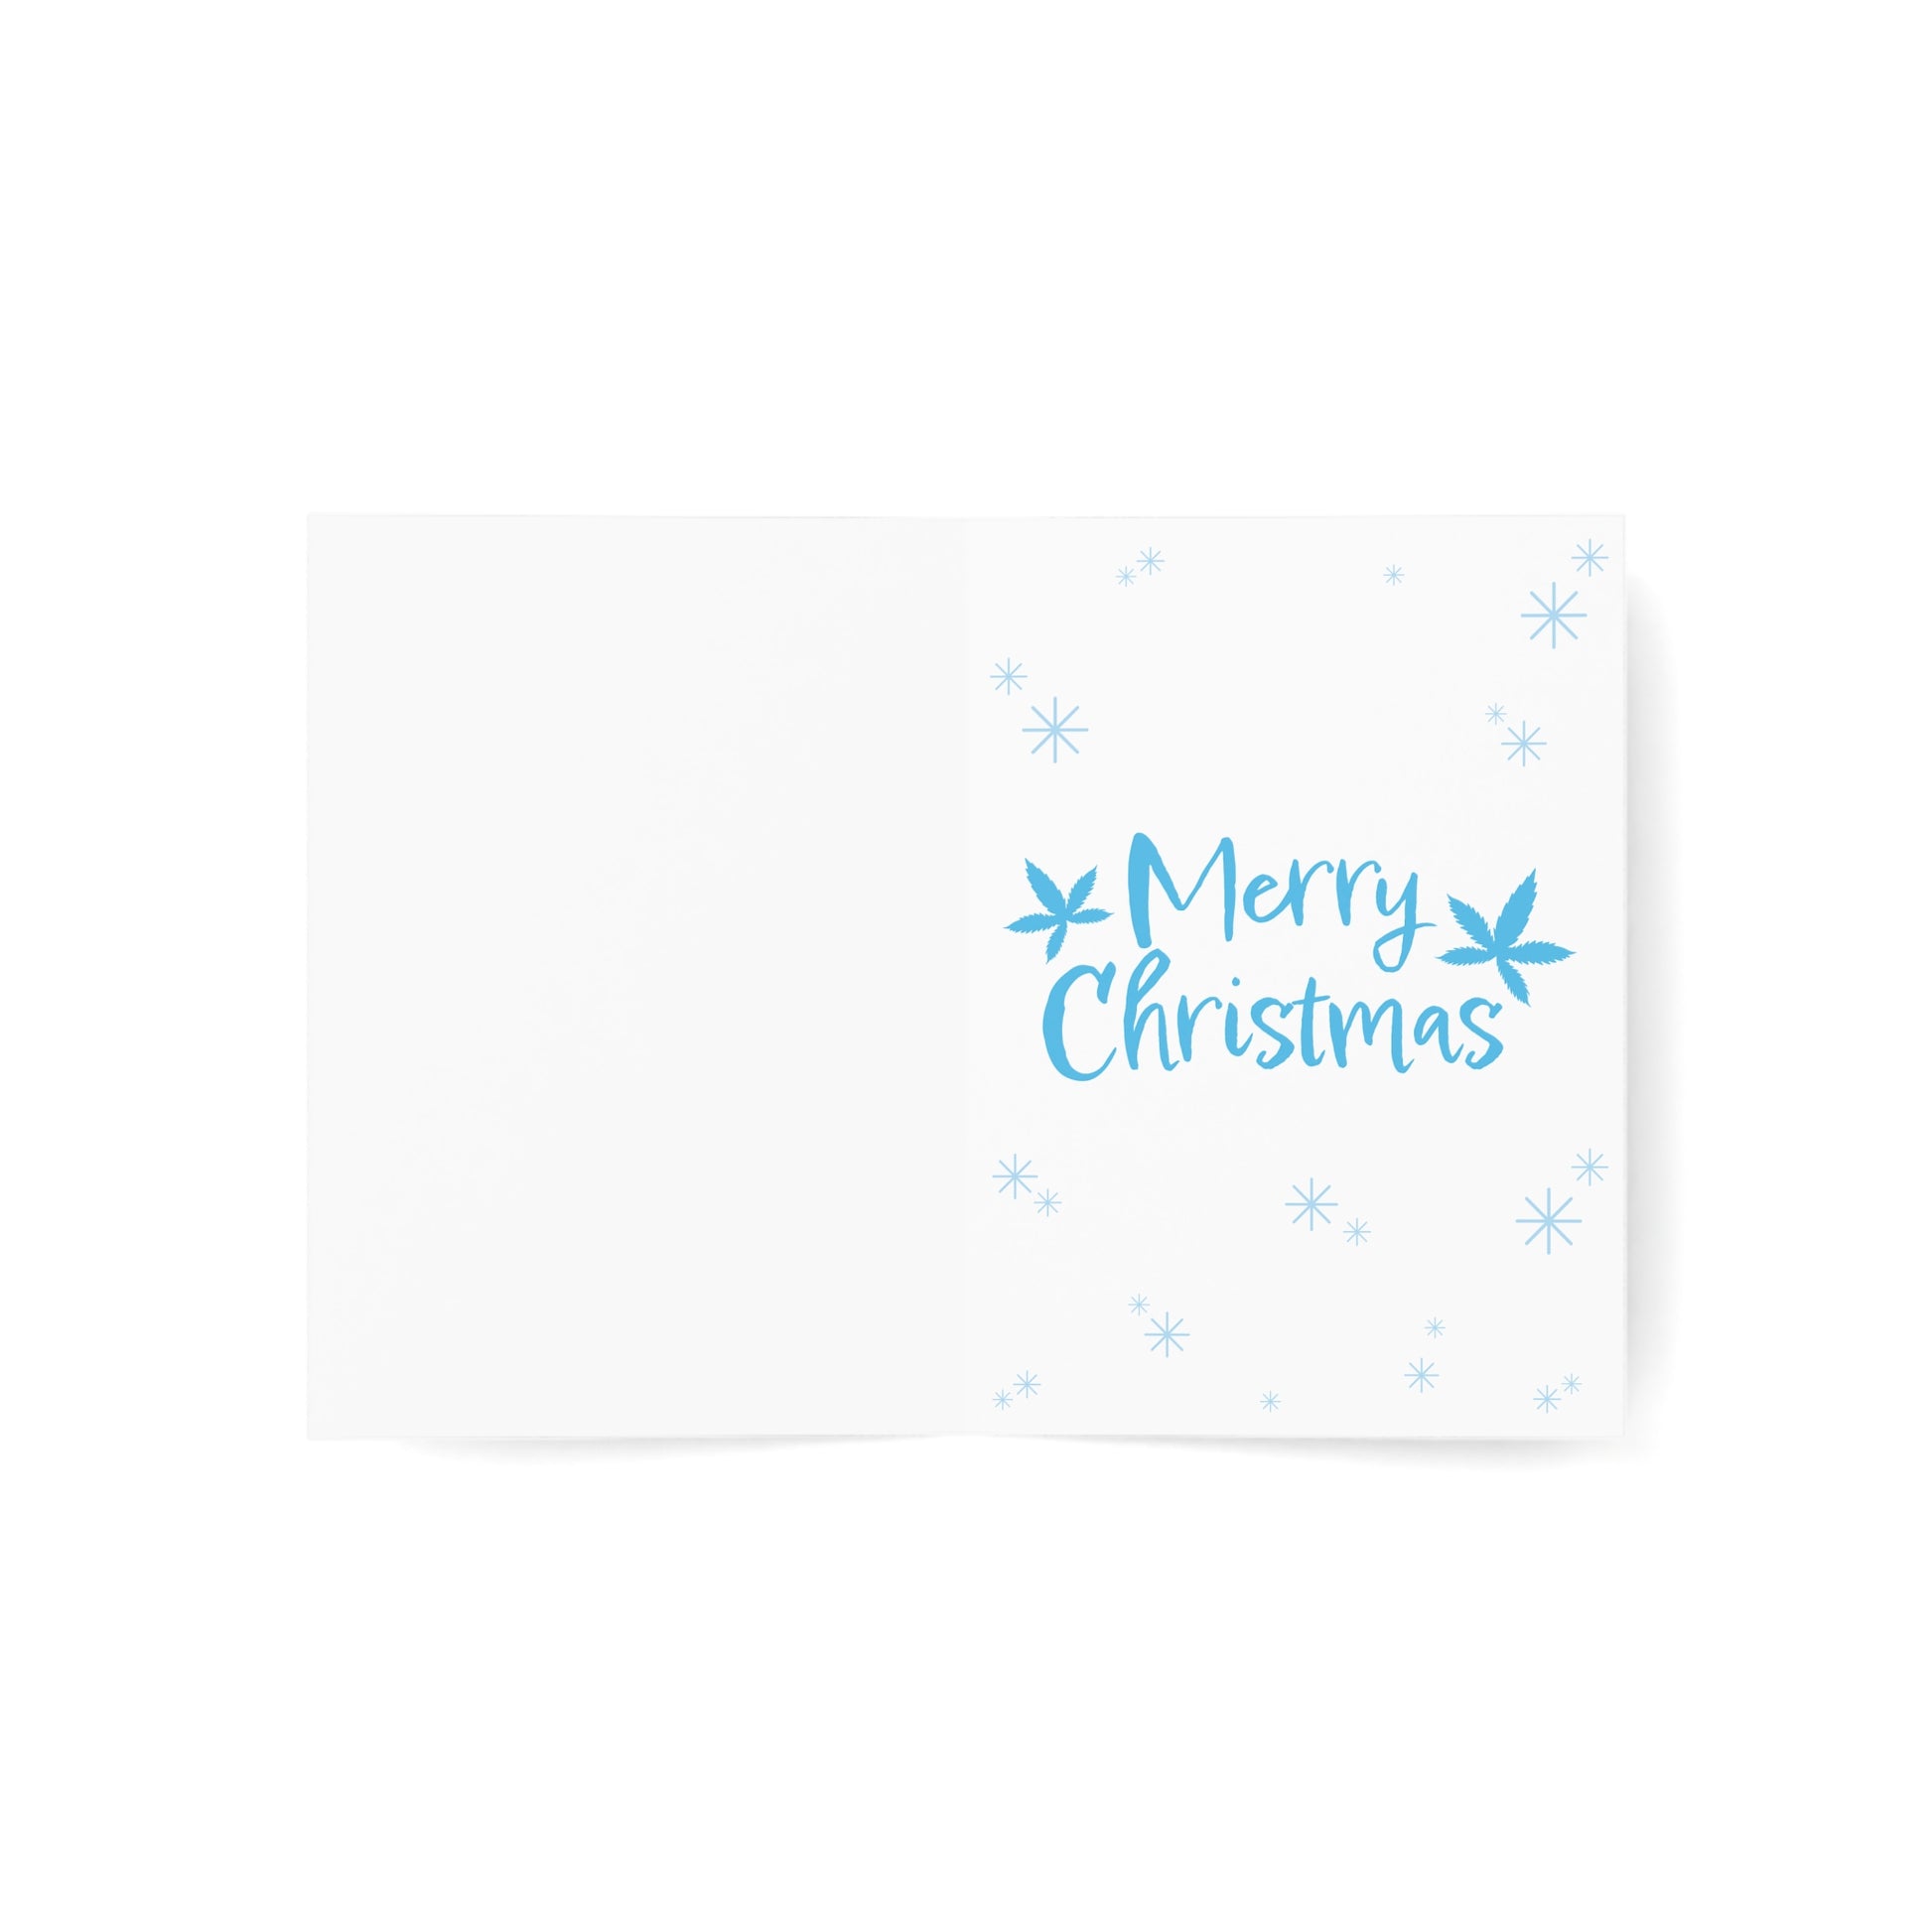 Open Potted Christmas Marijuana Plant Merry Christmas Greeting Card on a white background with "merry christmas" written in blue text, accompanied by blue snowflake designs, made from sustainable paper.